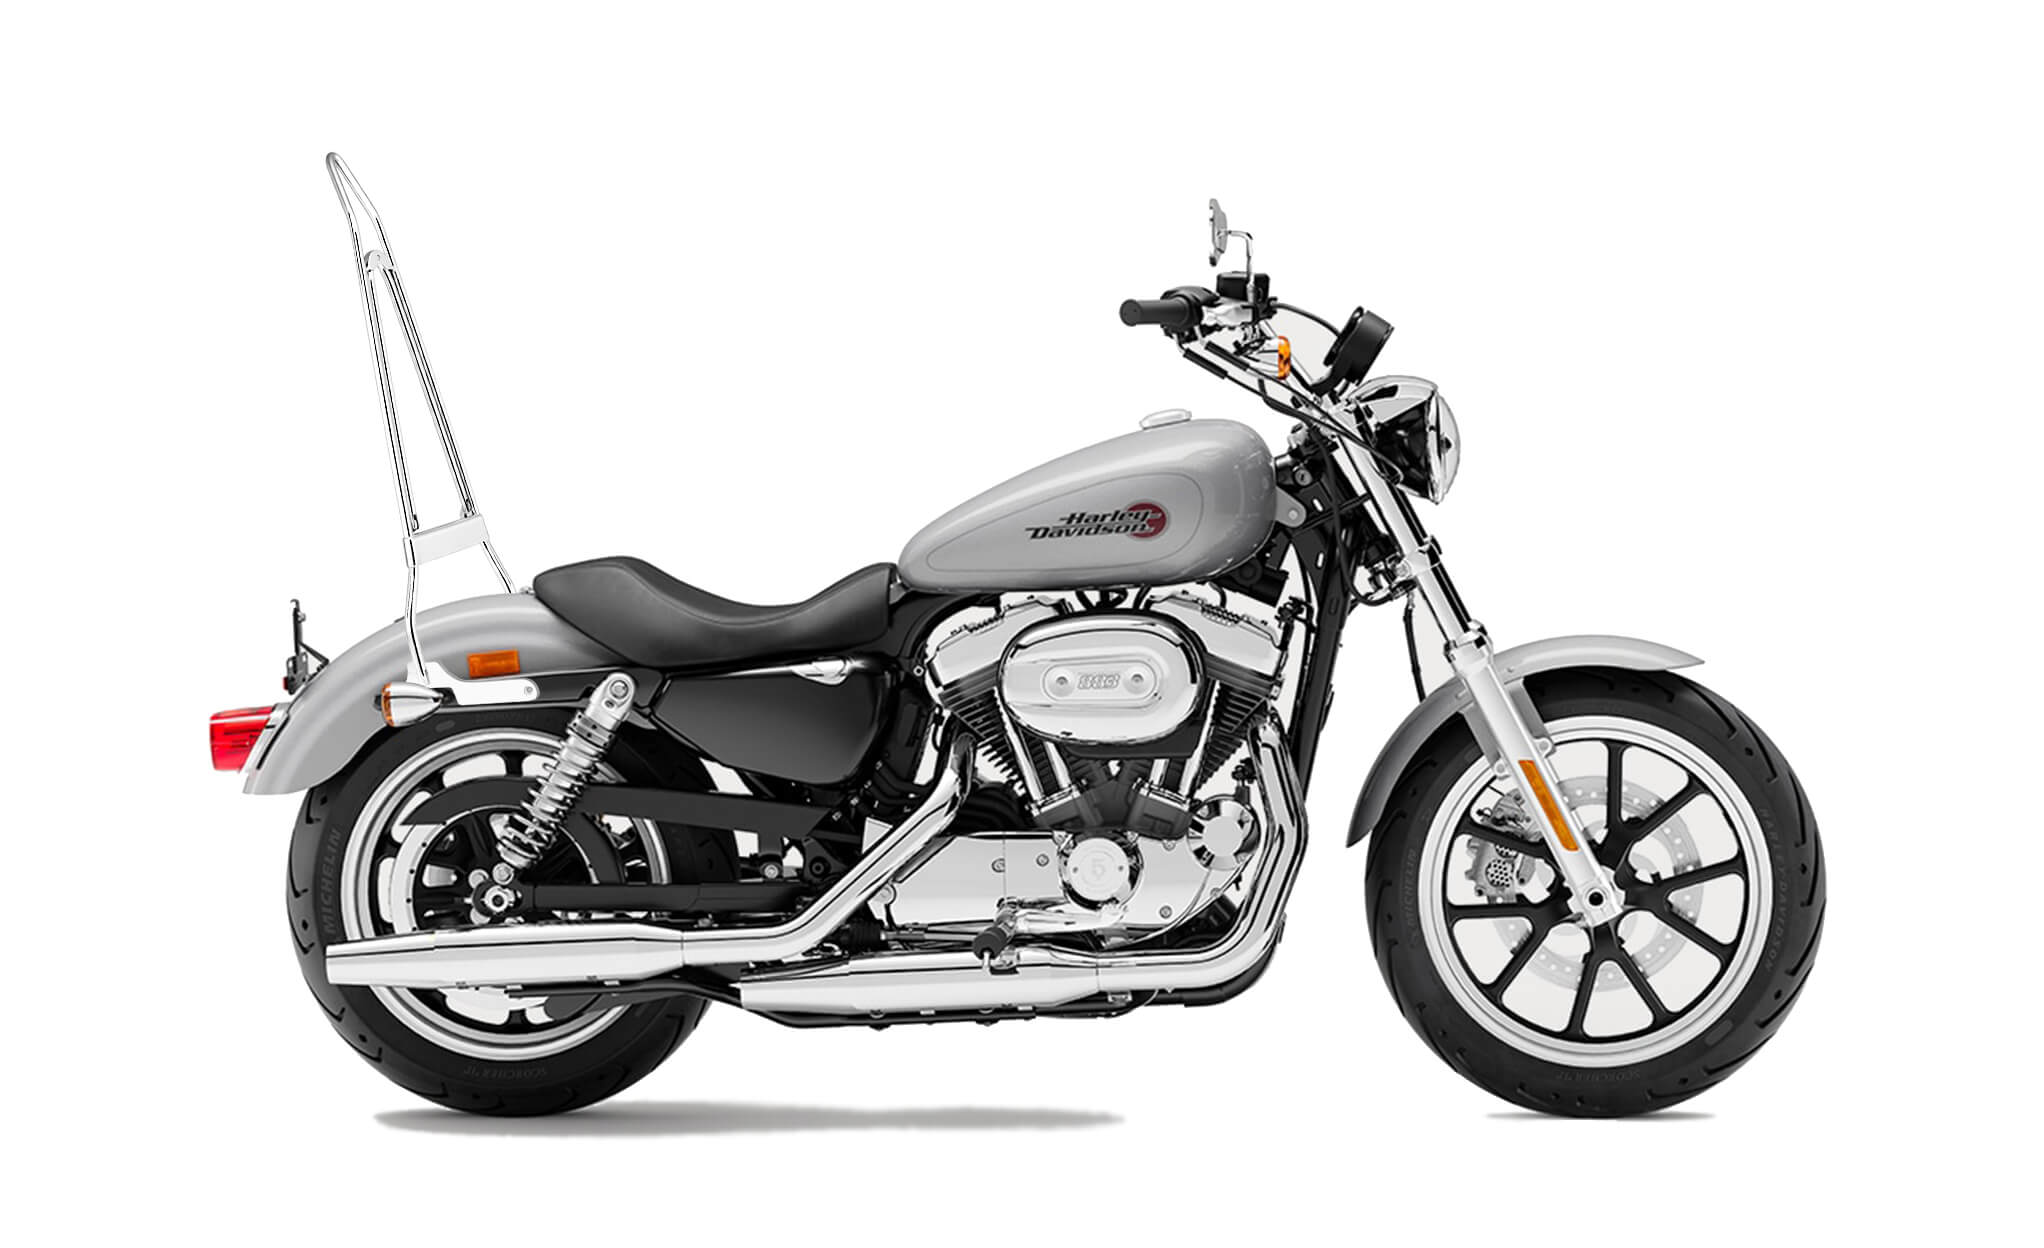 Iron Born Blade 25" Sissy Bar with Foldable Luggage Rack for Harley Sportster SuperLow Chrome Bag on Bike View @expand